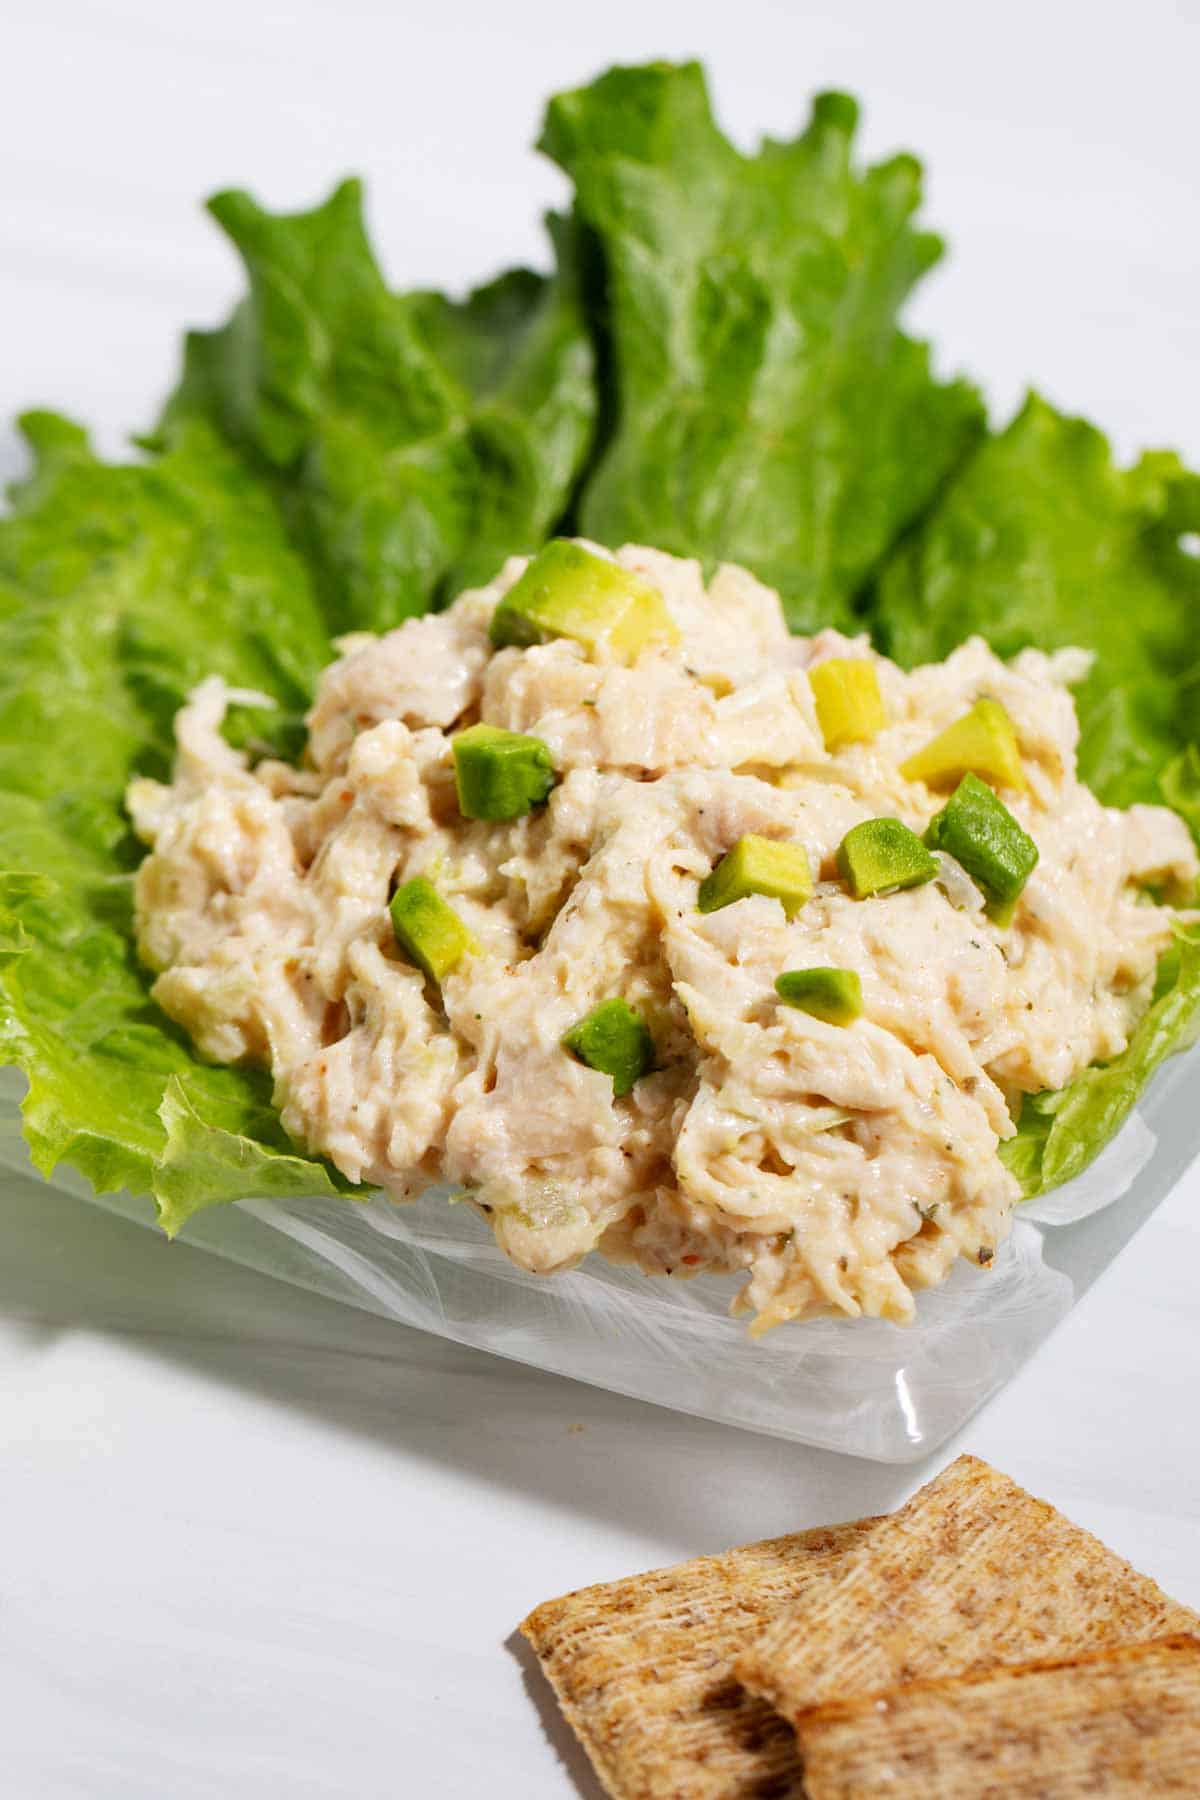 Avocado chunks in store-bought chicken salad to improve the taste.